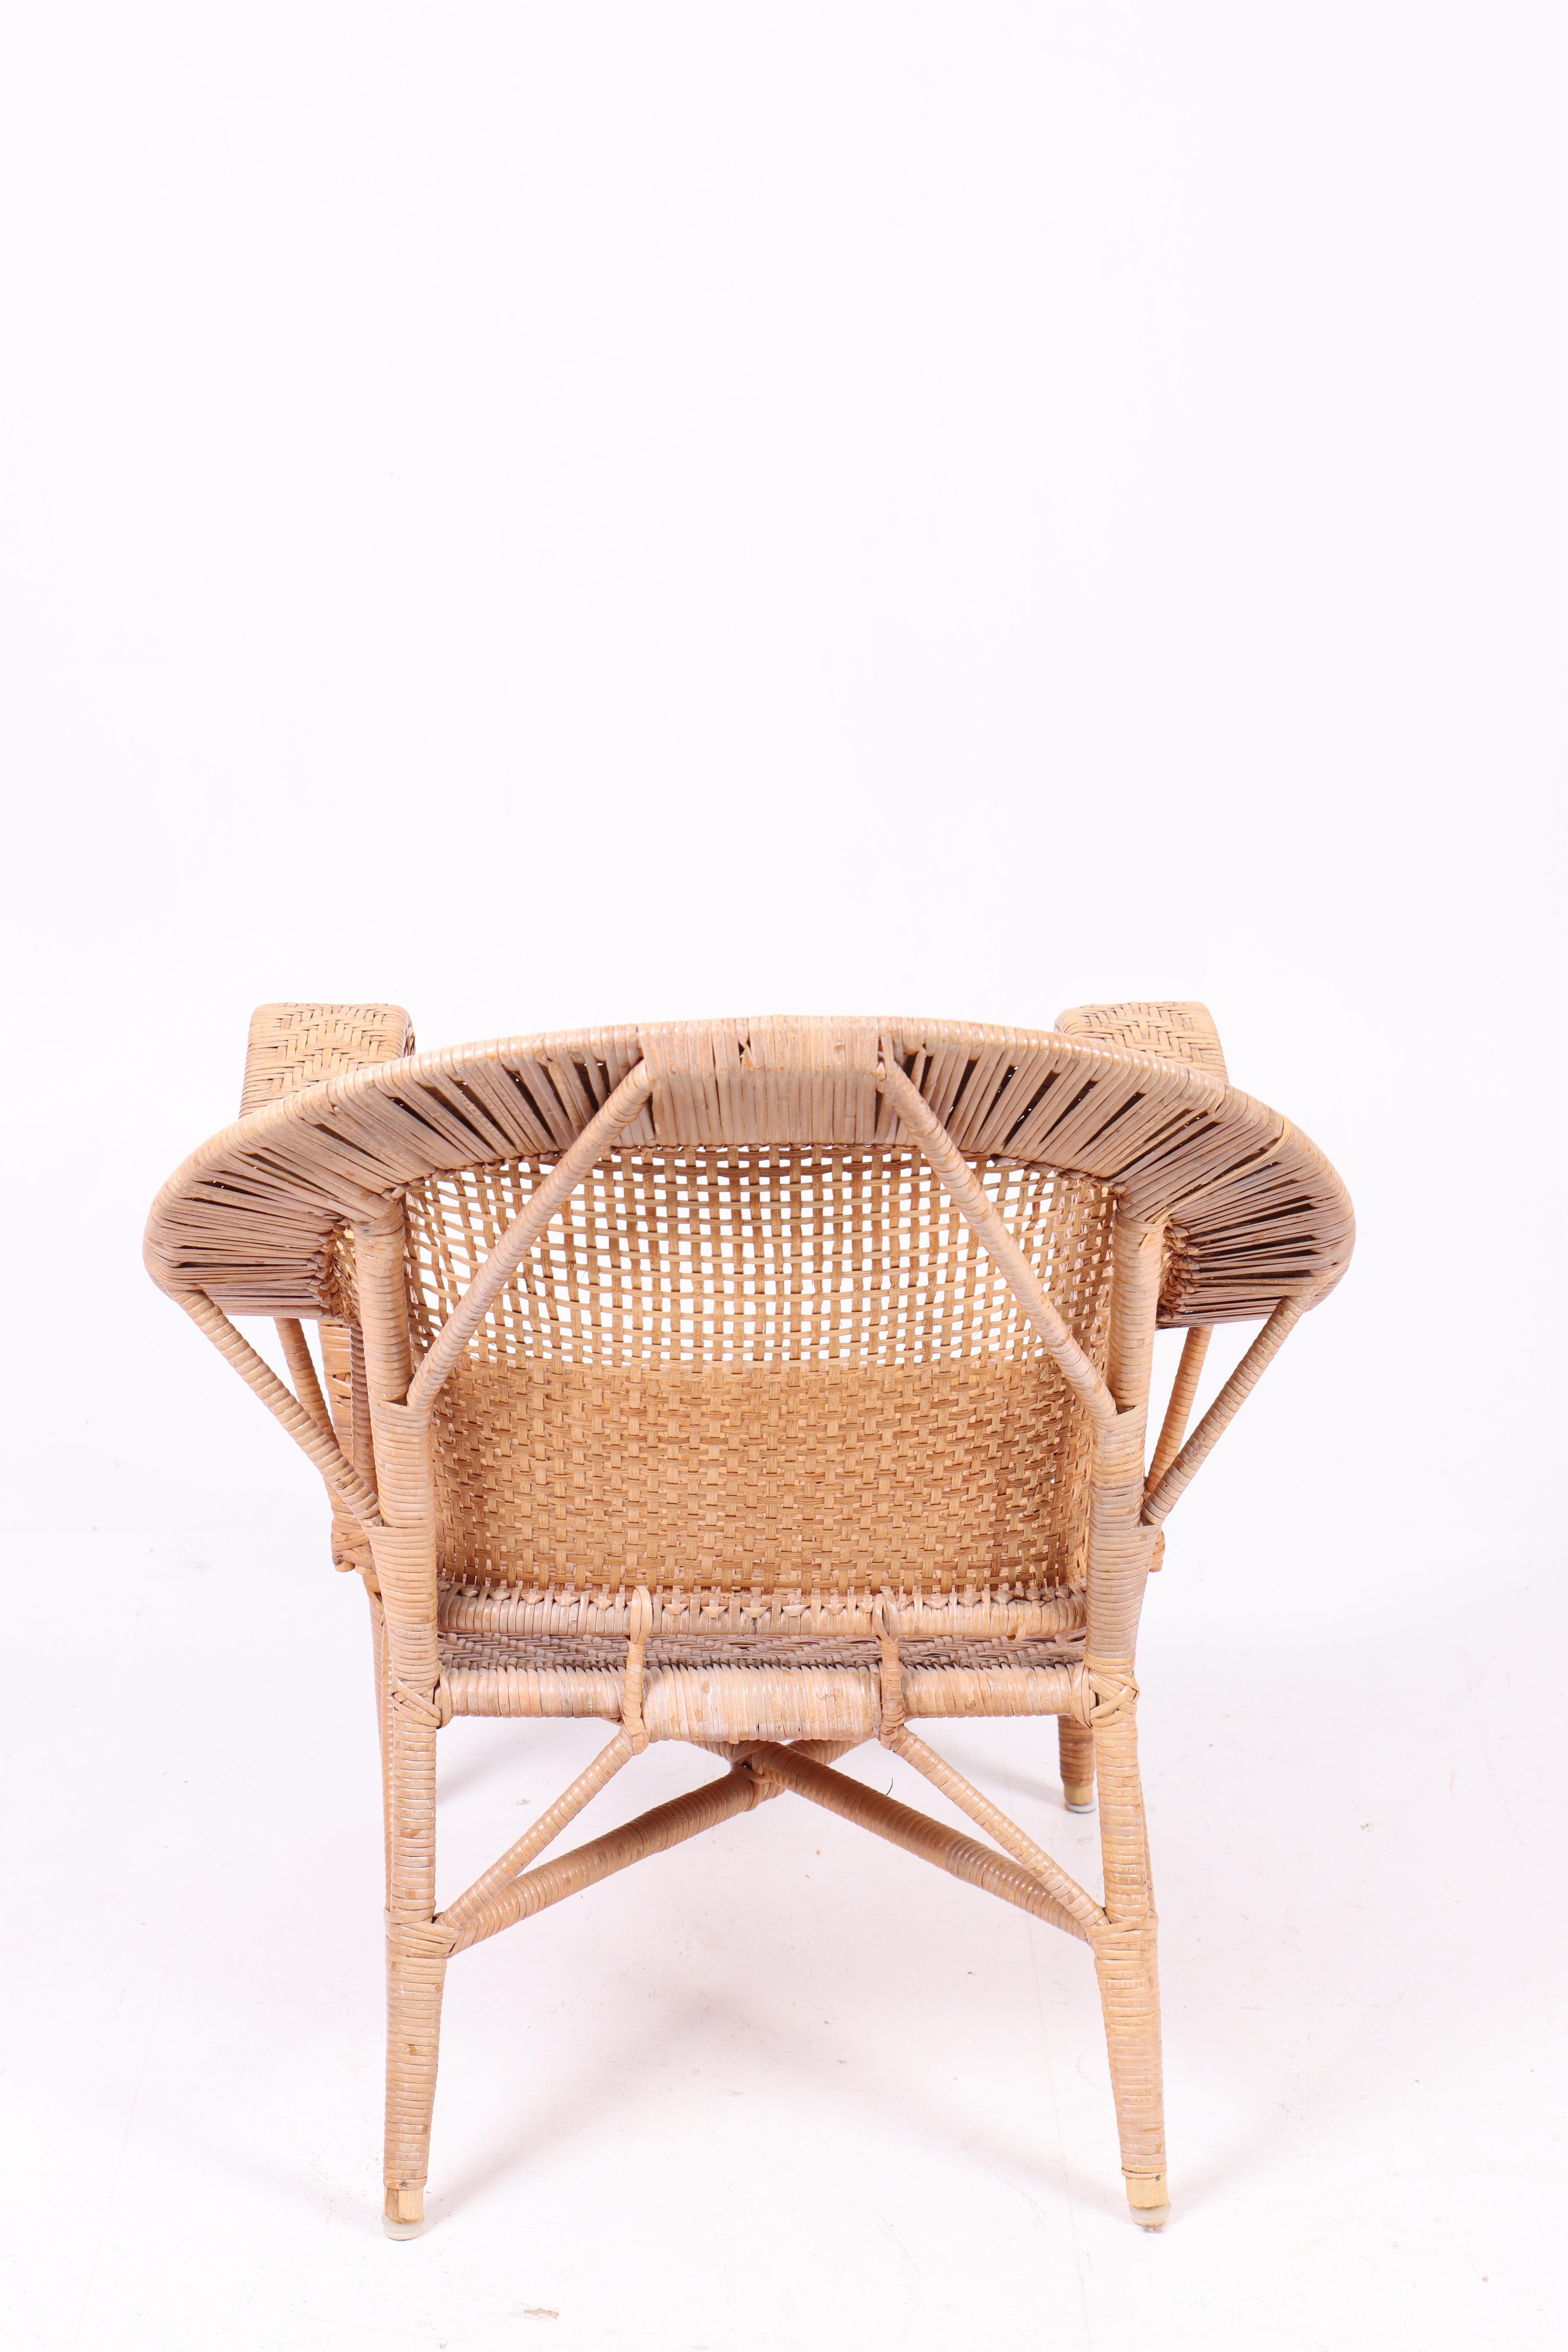 Cane Pair of Rattan Lounge Chairs by Kay Fisker, 1950s For Sale